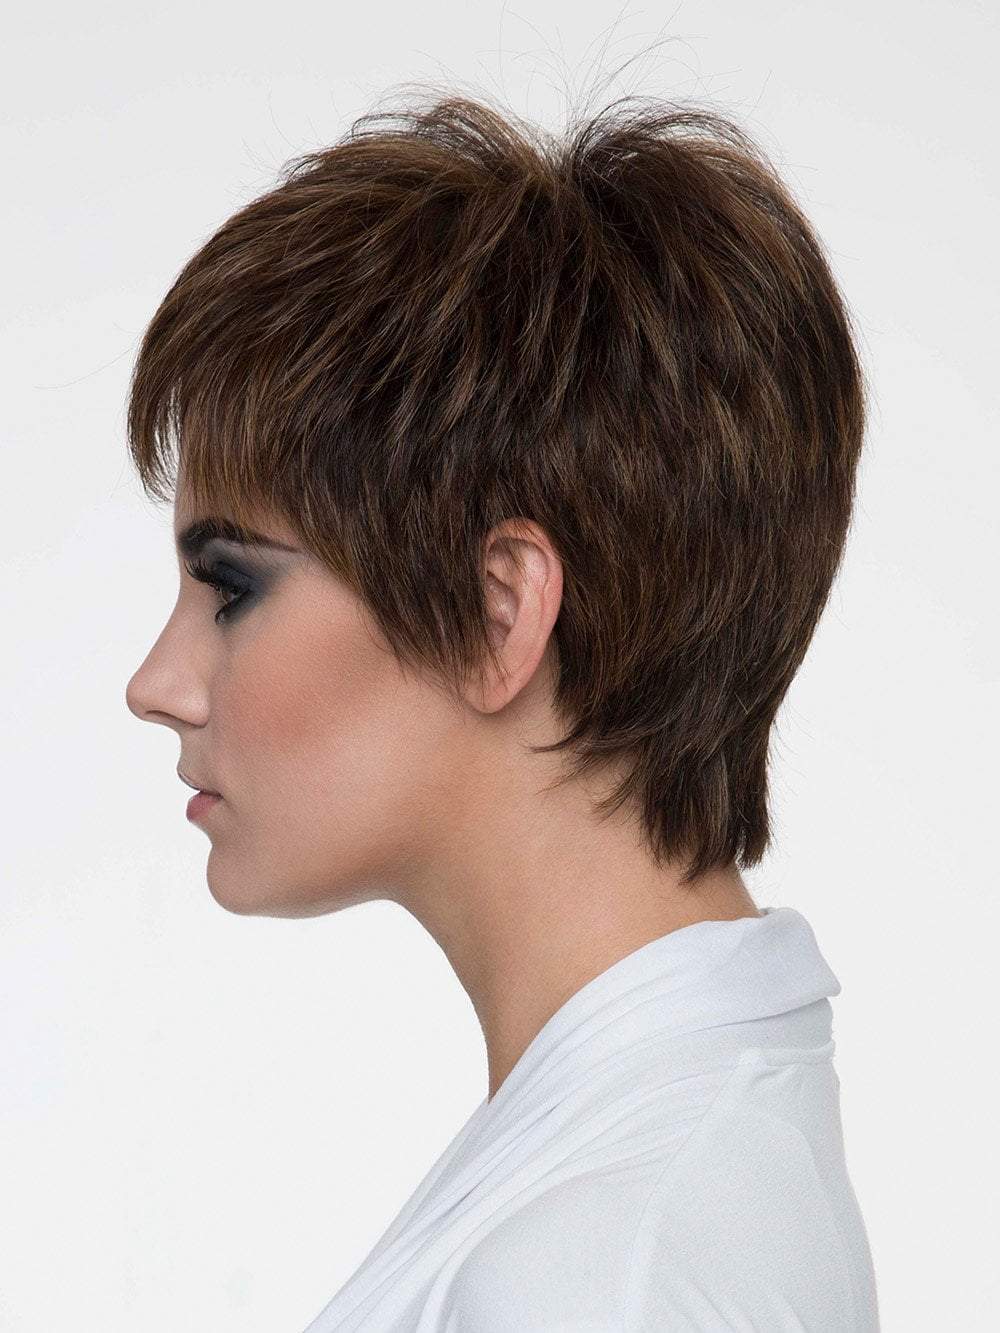 Flat iron for a spiky edge or heat roll for a softer appearance